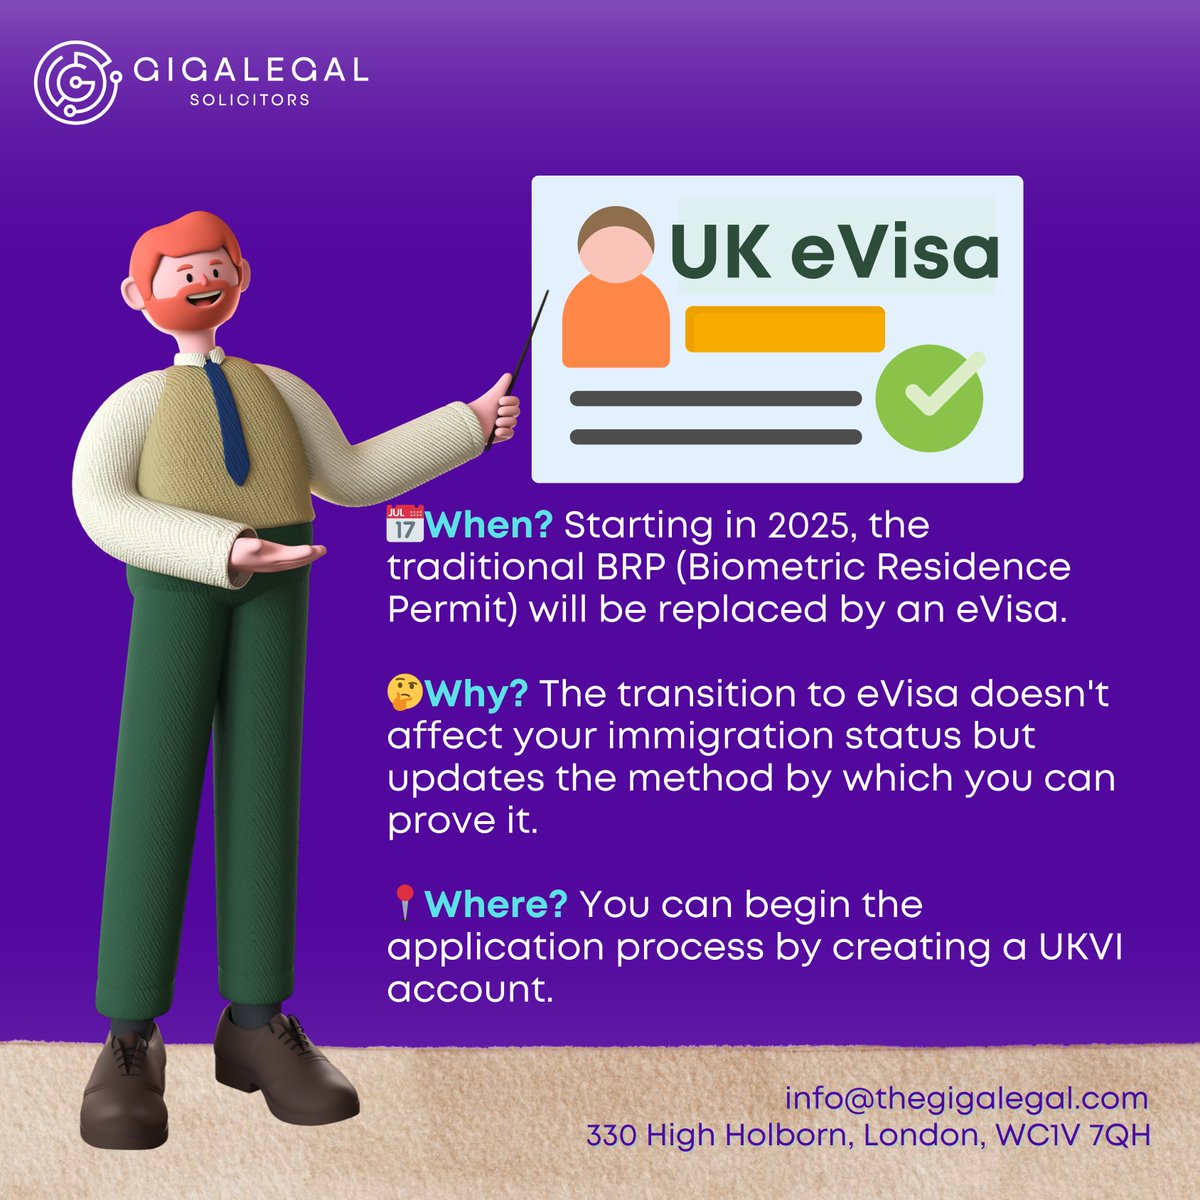 GigaLegal  Solicitors is here to guide you through the upcoming changes to proving your immigration status in the UK. 

Telephone: +442074067654
Mobile/WhatsApp: 07428 668336
𝐄𝐧𝐪𝐮𝐢𝐫𝐢𝐞𝐬: 𝐢𝐧𝐟𝐨@𝐭𝐡𝐞𝐠𝐢𝐠𝐚𝐥𝐞𝐠𝐚𝐥.𝐜𝐨𝐦

#GigaLegal #ukimmigration #BRP #eVisa